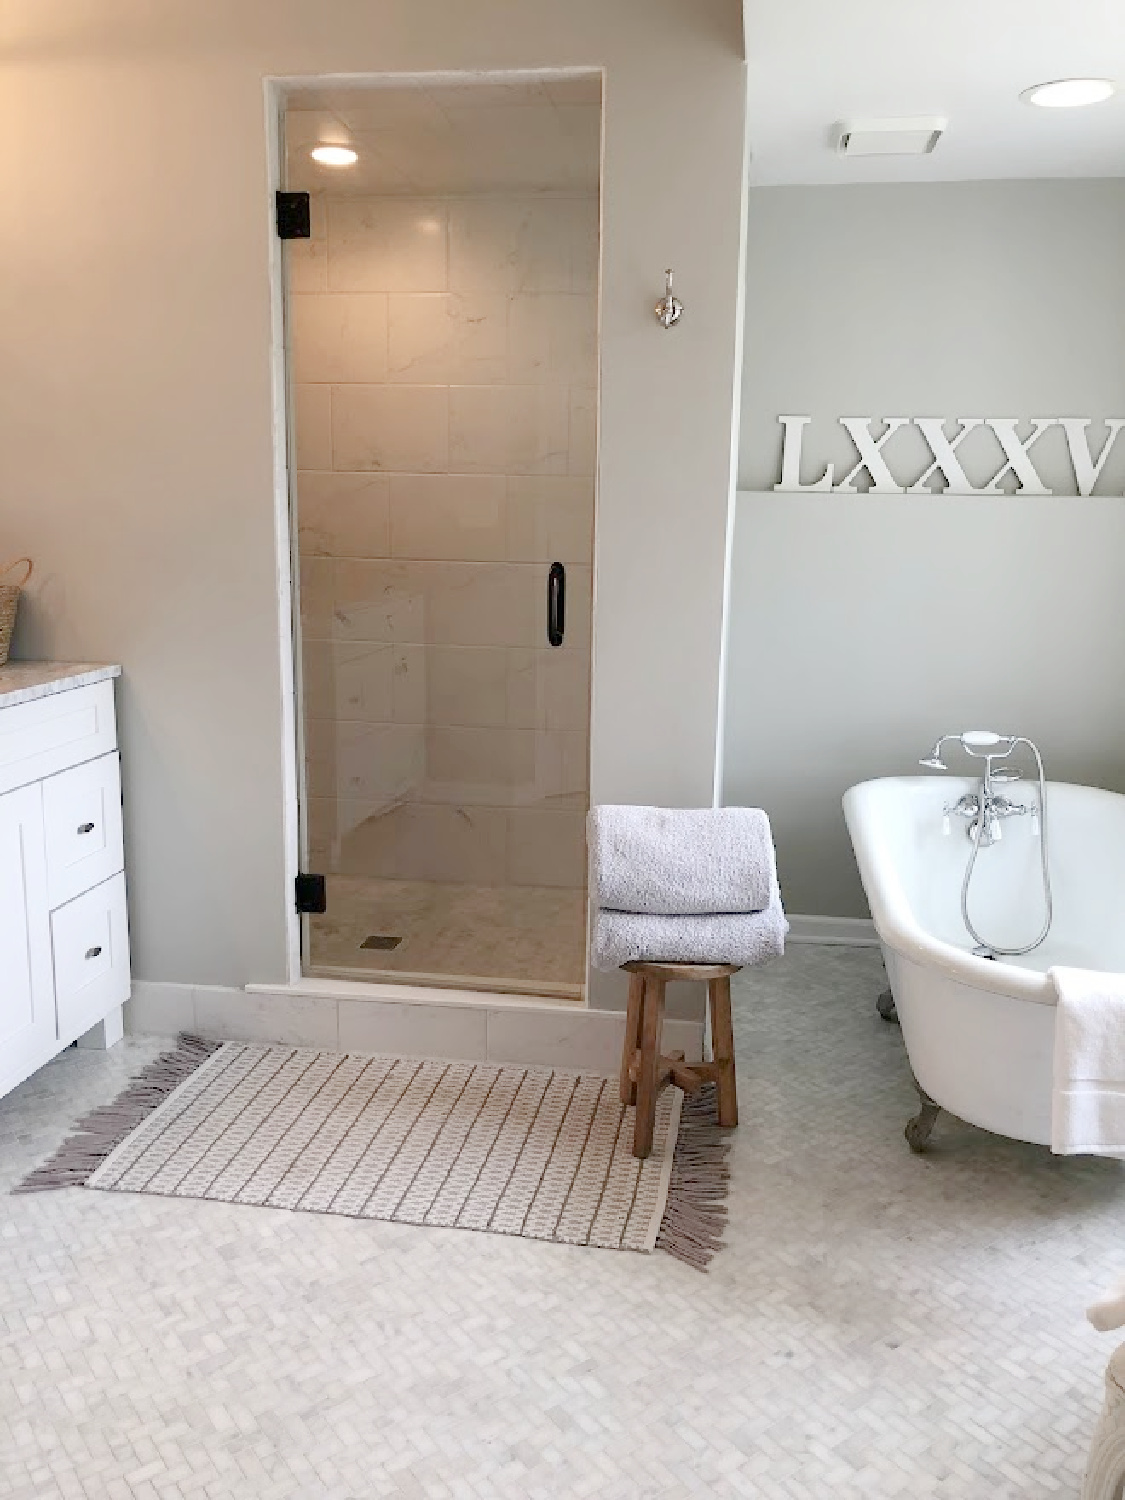 SW Repose Gray walls, white Grecian herringbone marble mosaic tile floor, vintage clawfoot tub, and spa like walk in shower in our modern French renovated bath at the Georgian - Hello Lovely Studio.